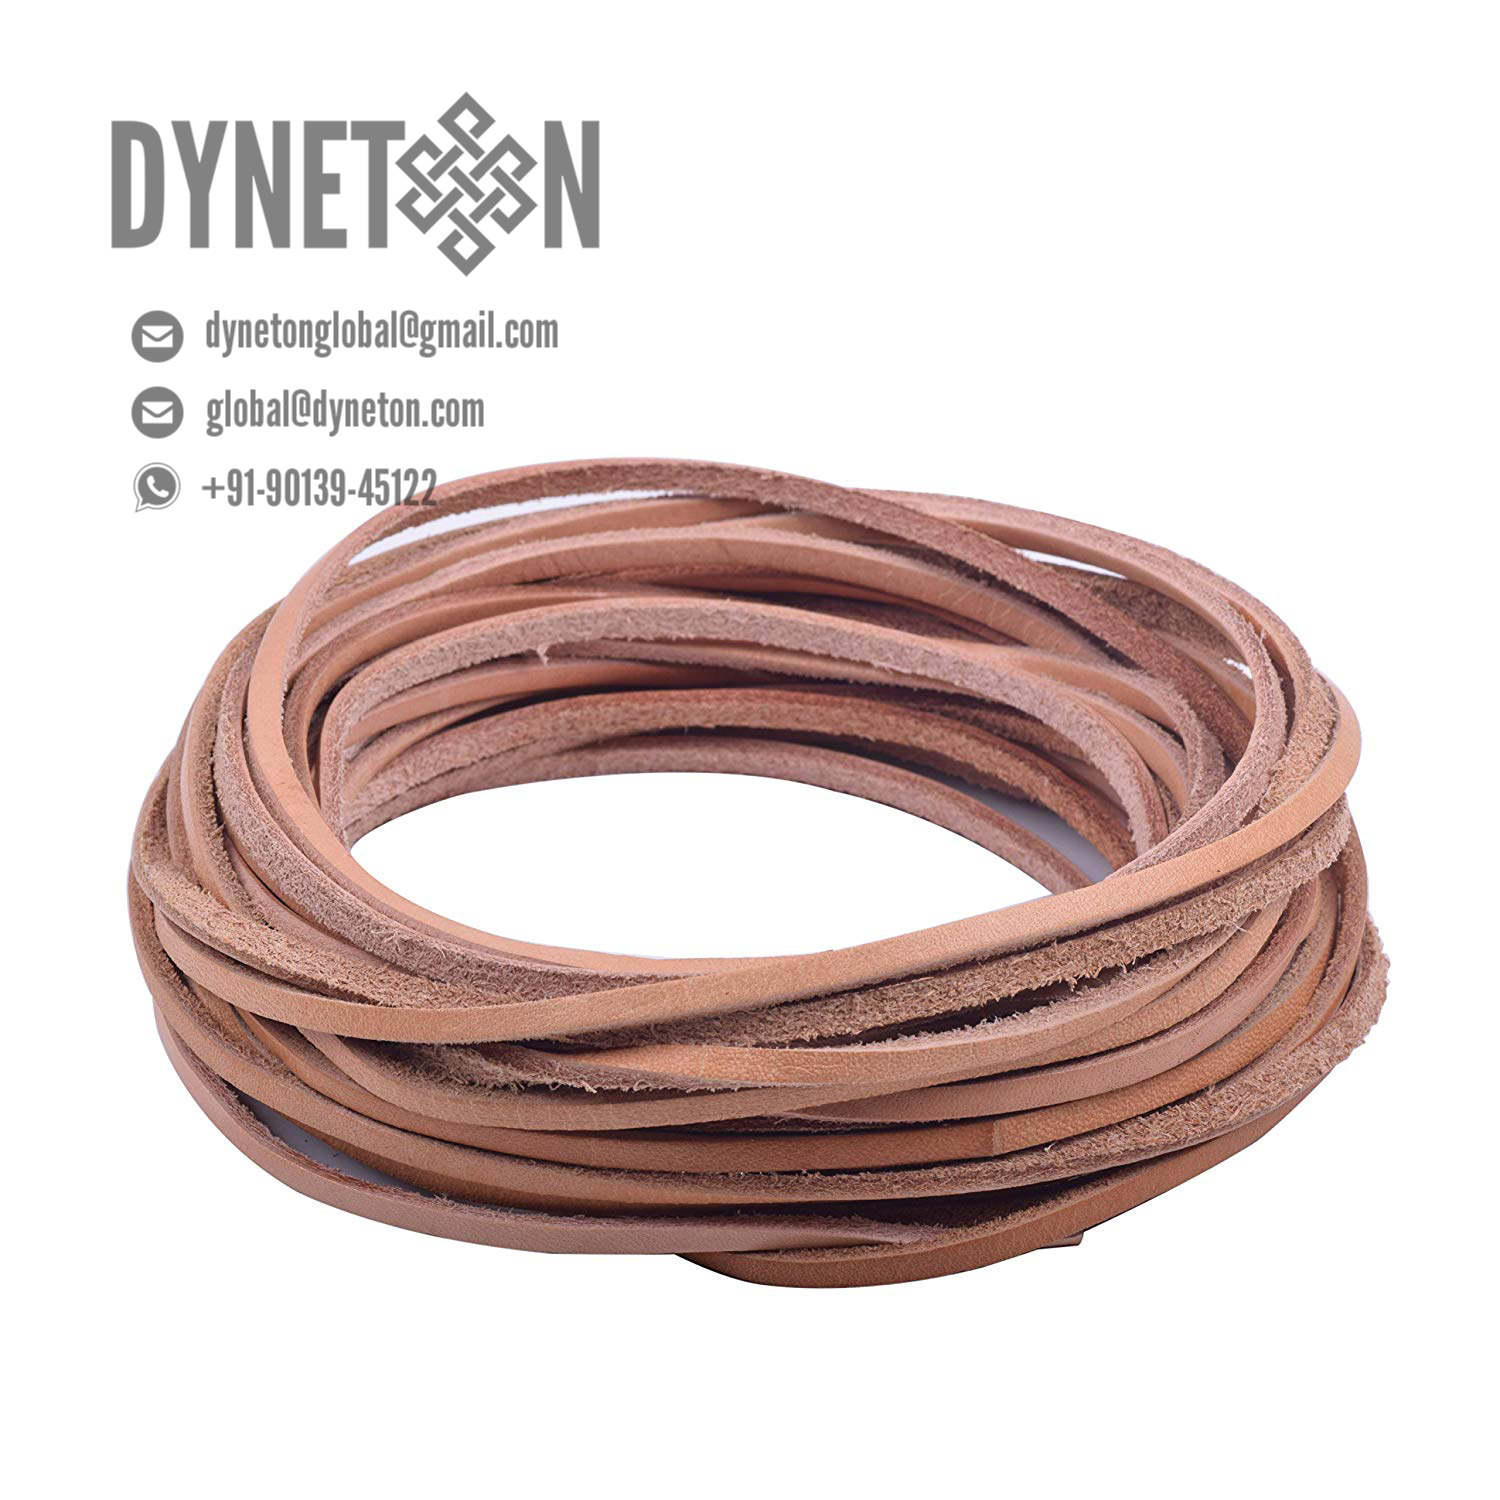 4mm Flat Leather Cord - DYNETON / Flat Leather Cords 4 mm